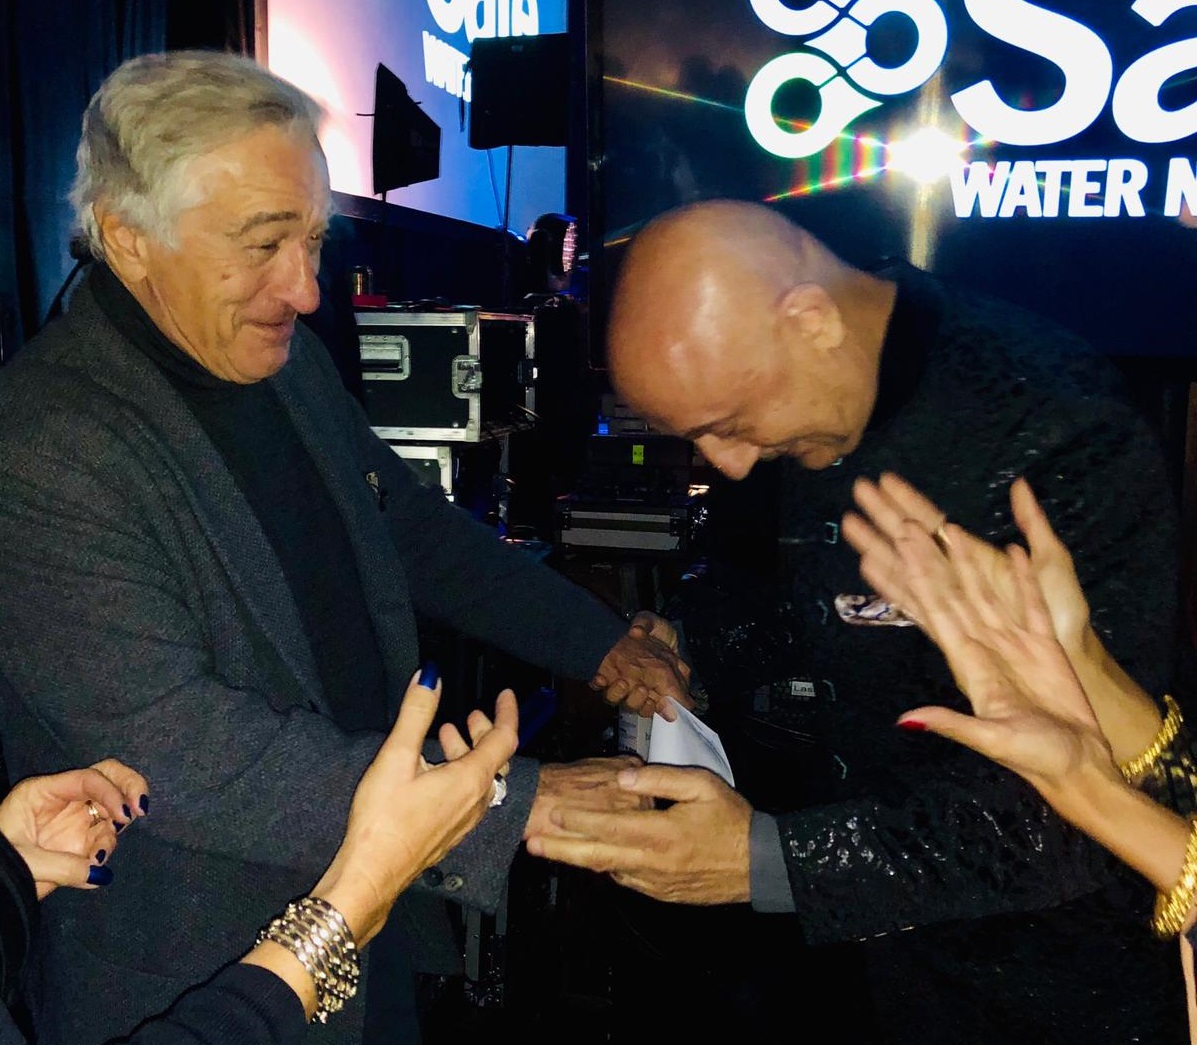 Anupam Kher (left) greeting Robert De Niro when the two actors met at Safe Water Network's "Water for All Ball" in New York on October 23.